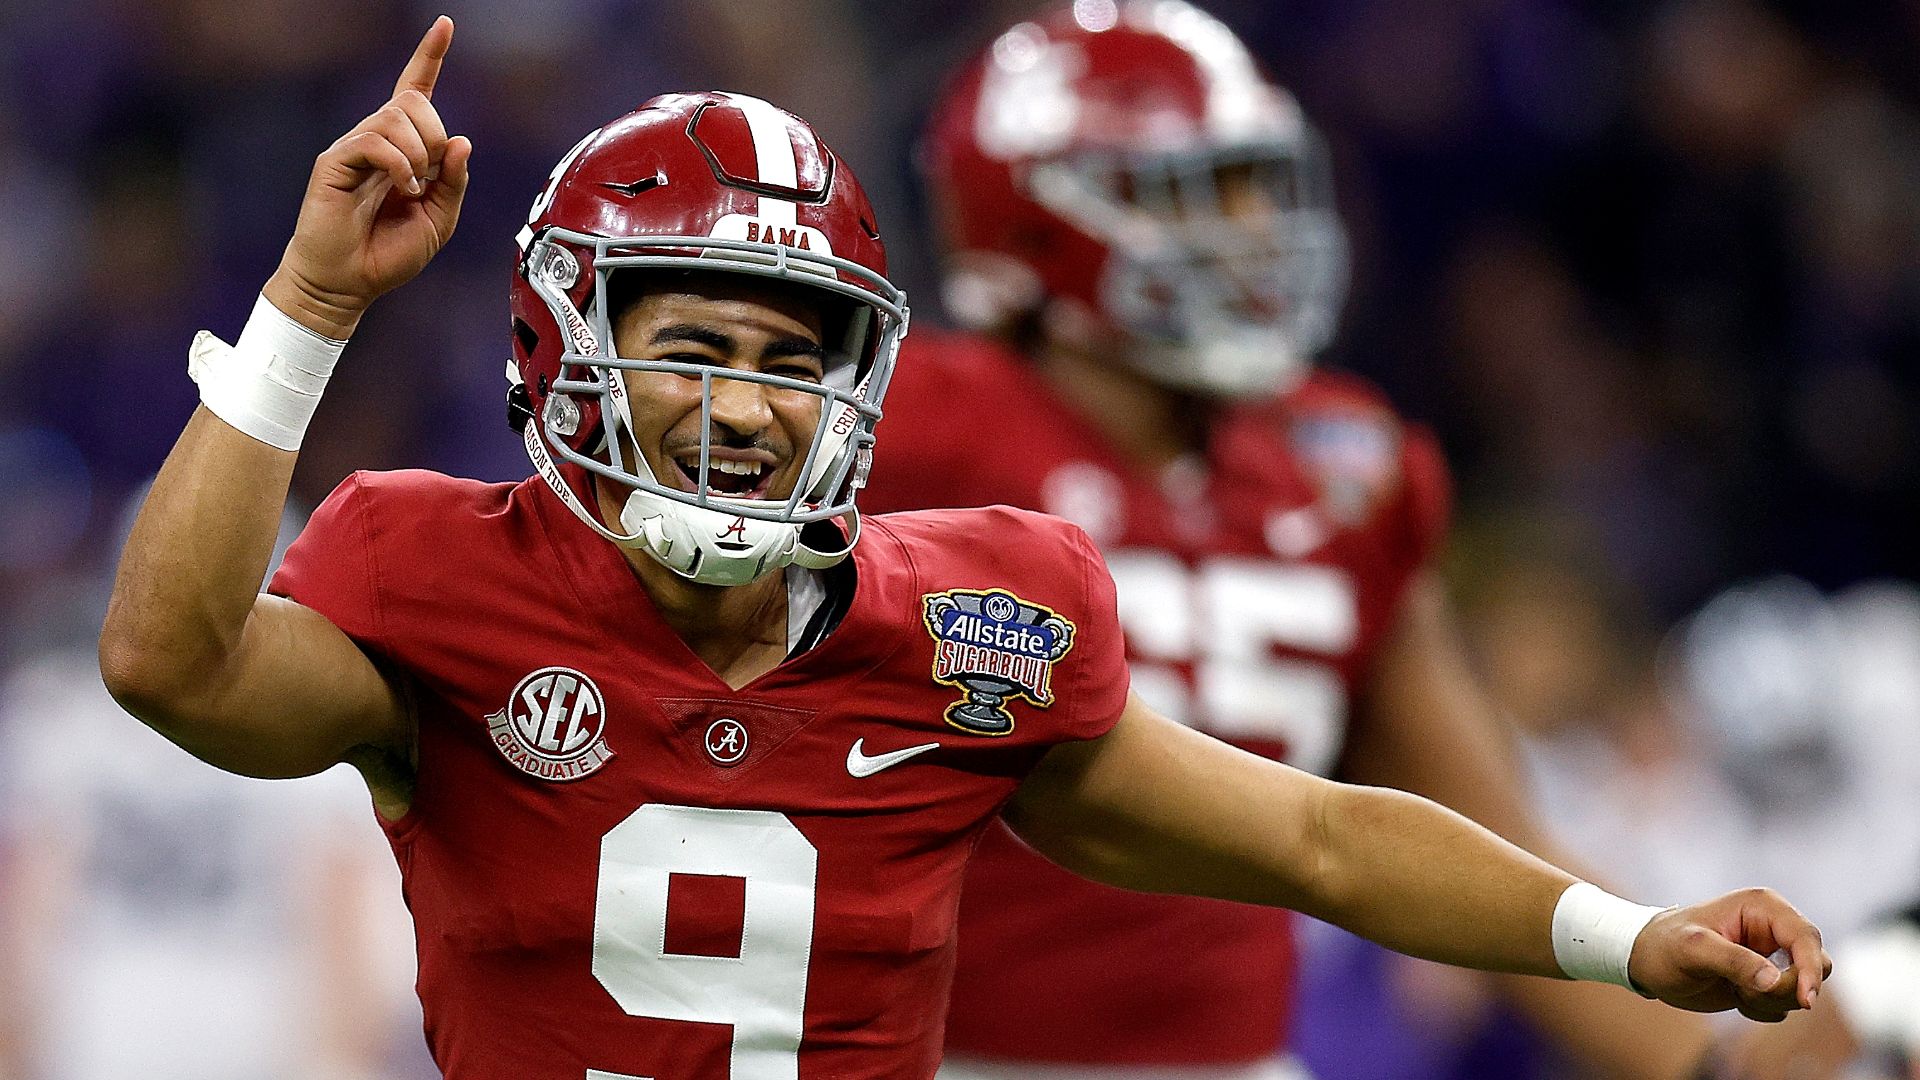 Bama's Young seems solidified as top pick in NFL draft